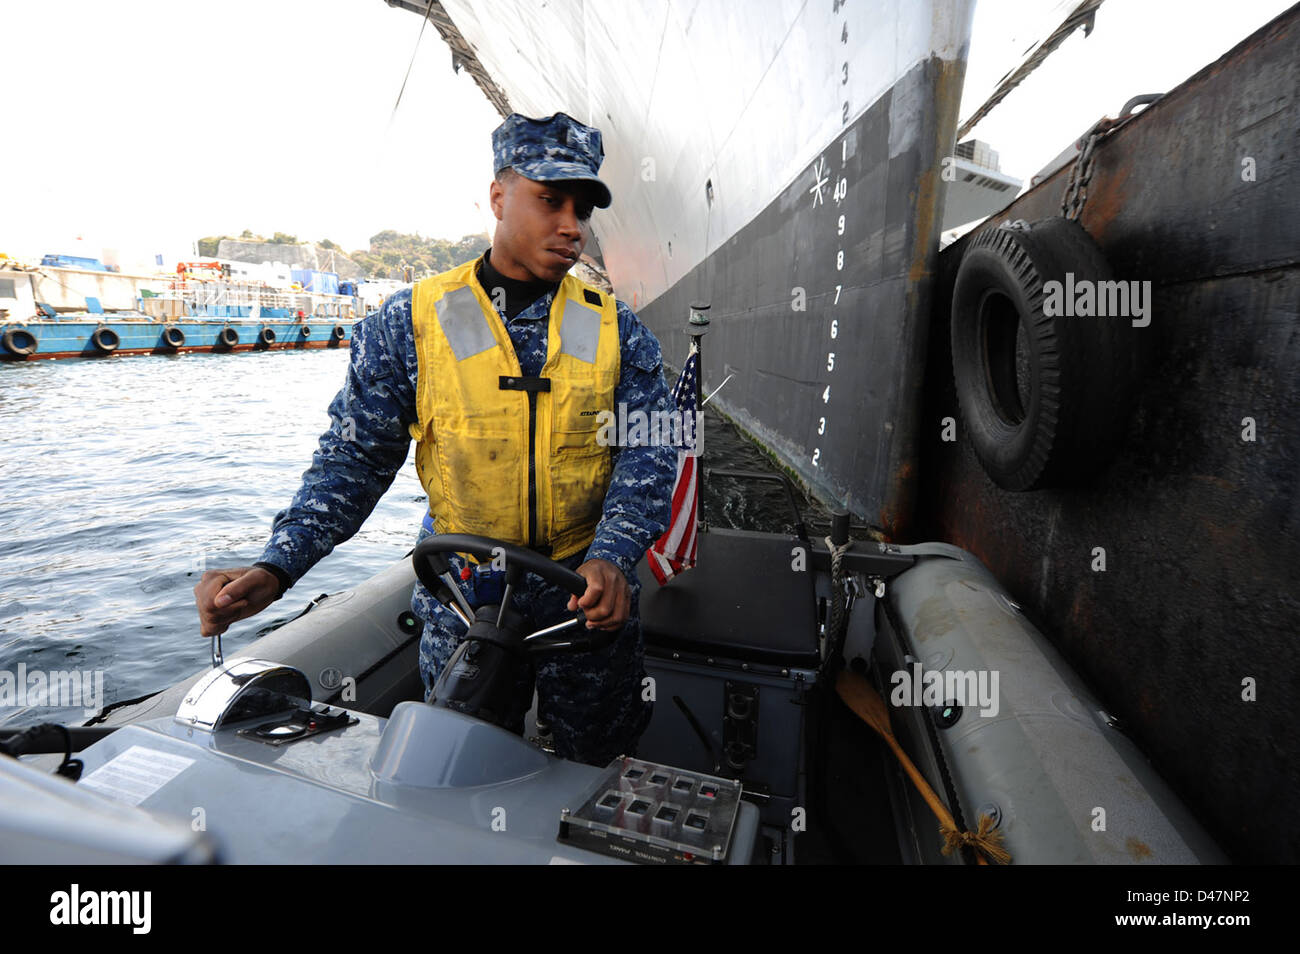 A Sailor pilots a rigid-hull inflatable boat. Stock Photo